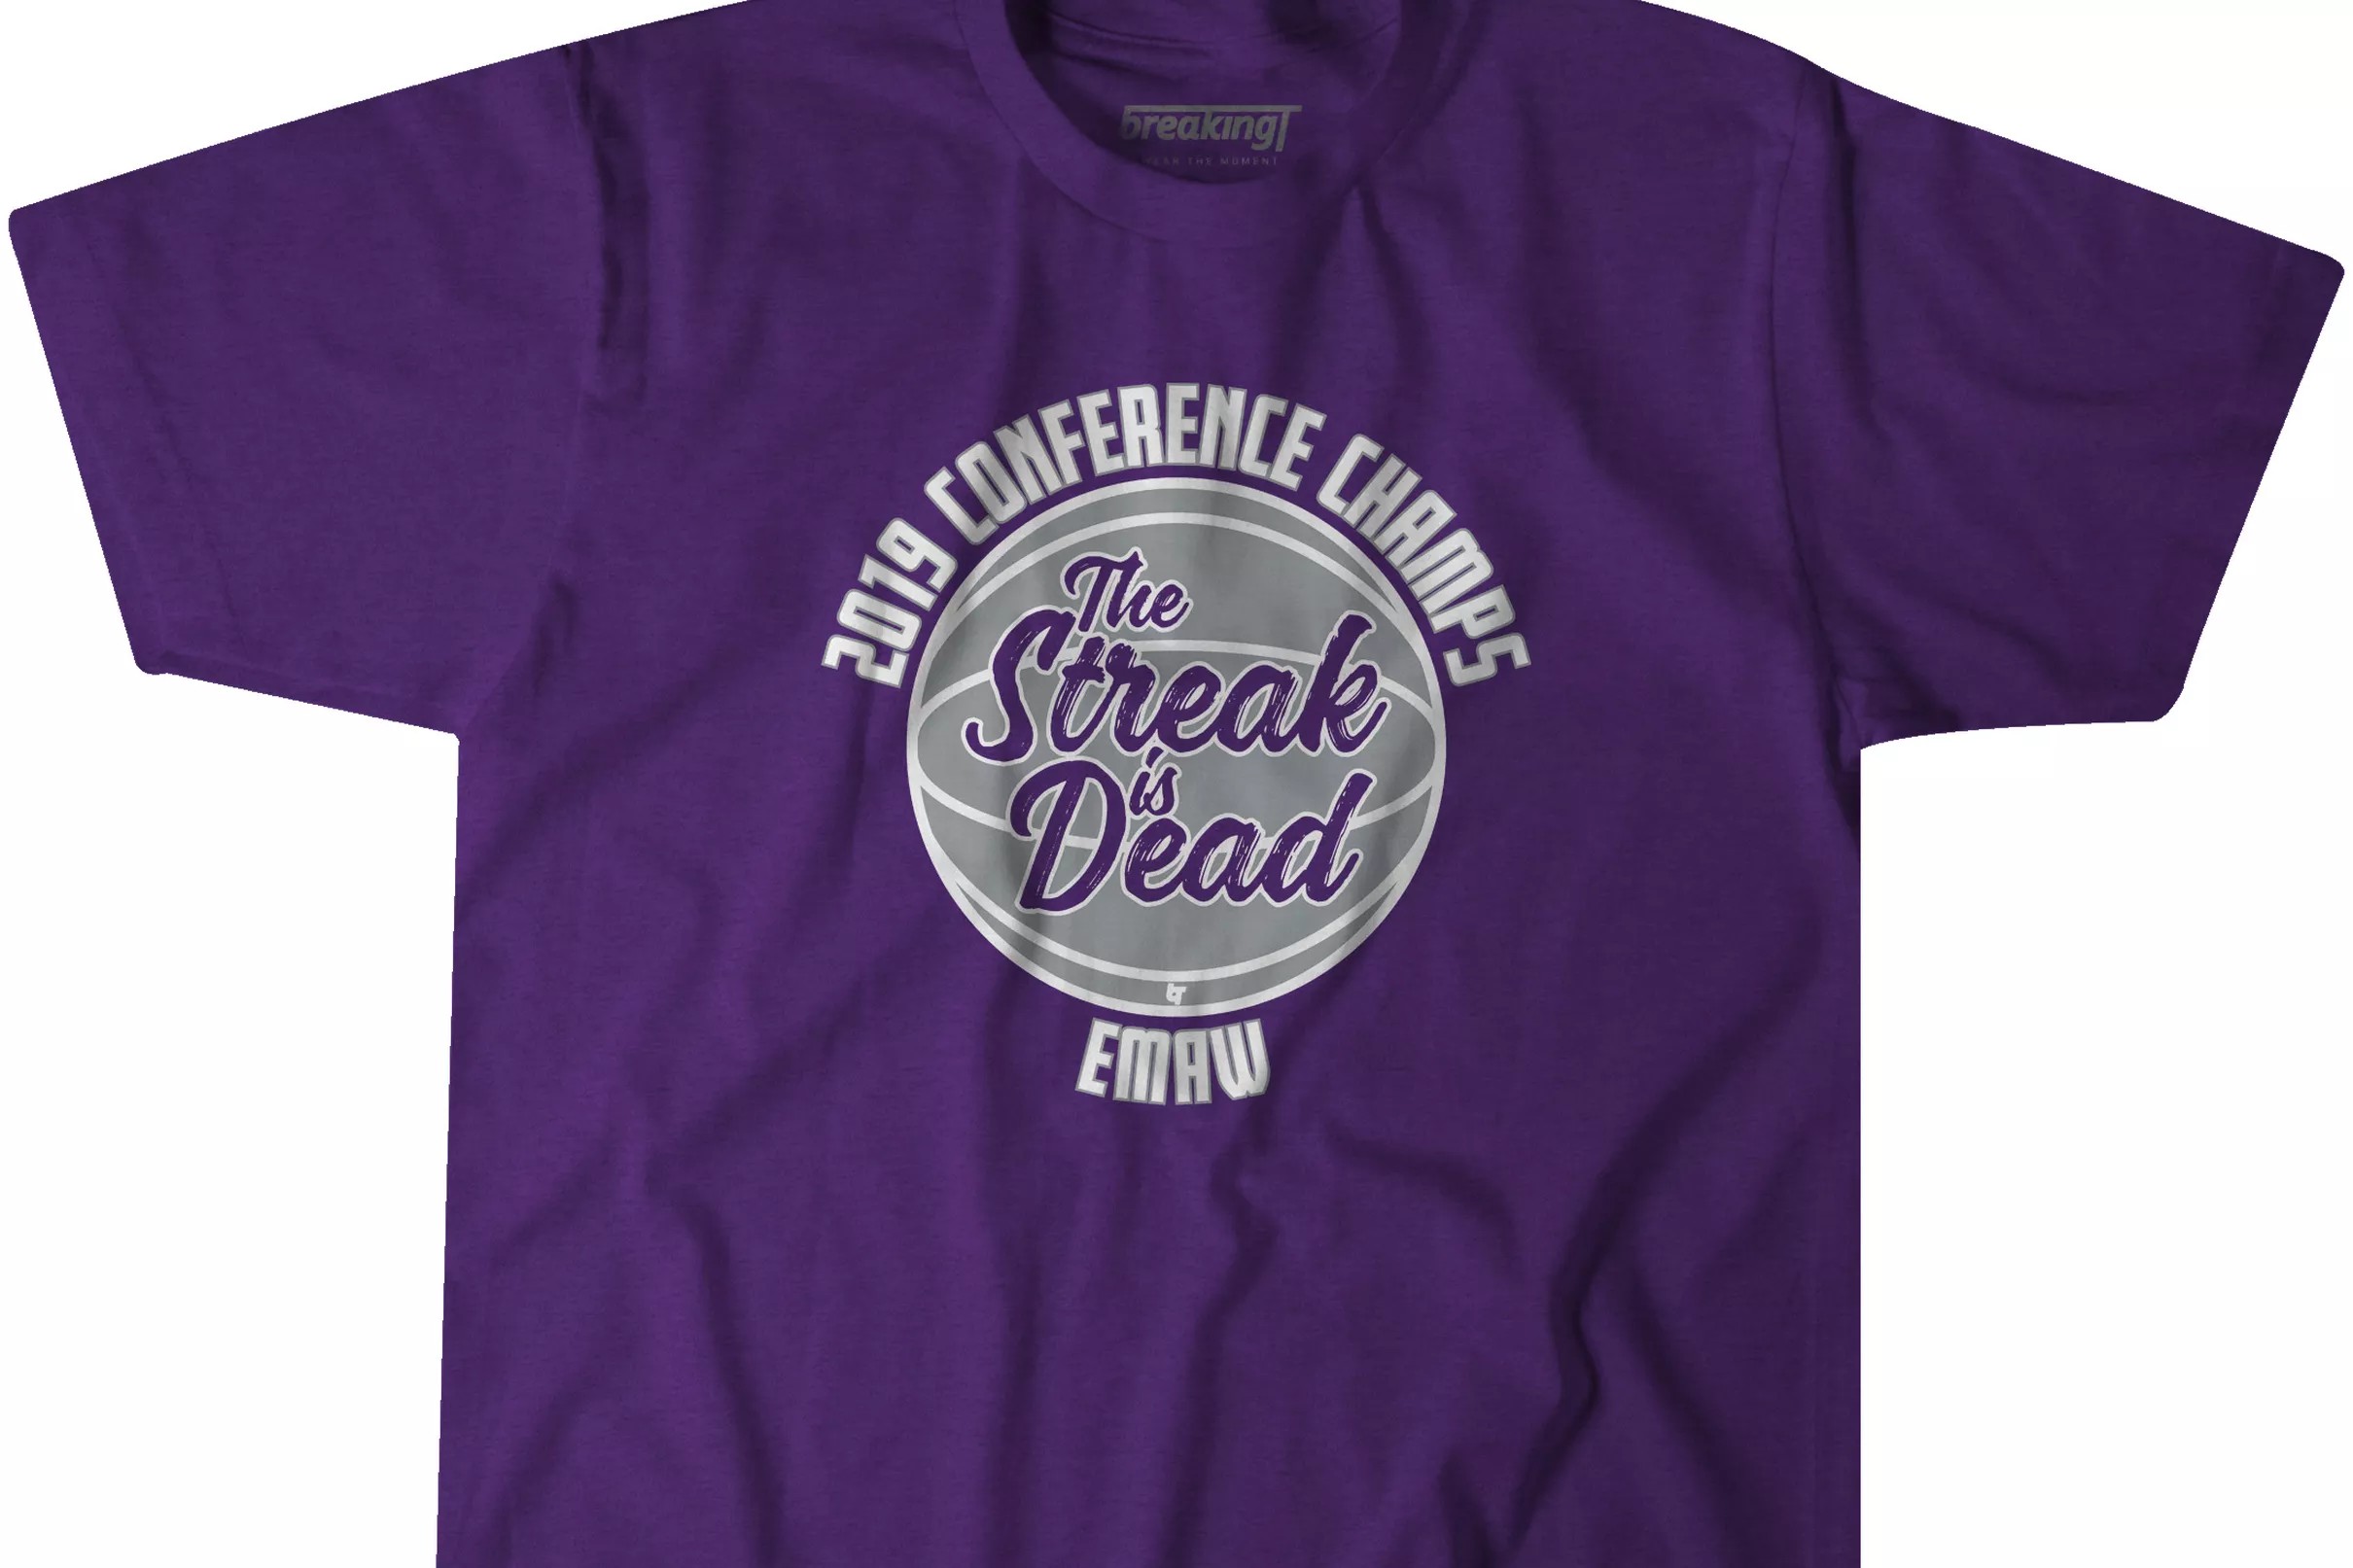 KSTATE — BIG 12 CHAMPIONS! Get your tshirt now!